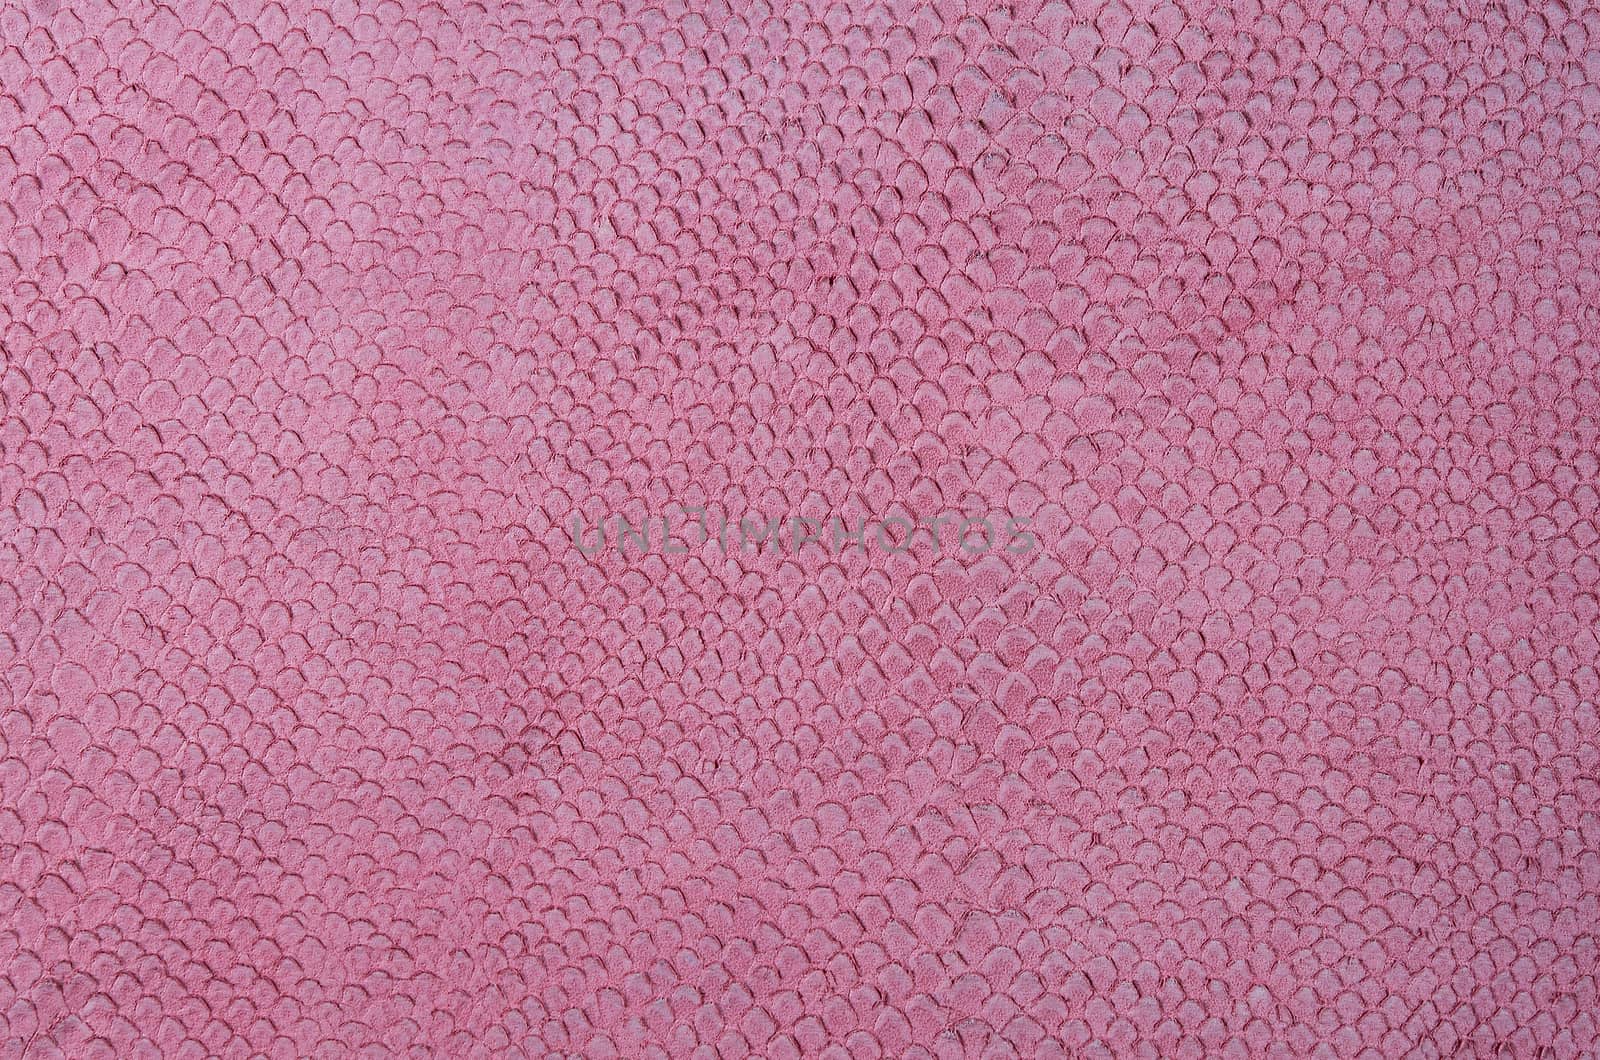 Pink leather texture closeup. Useful as for background.